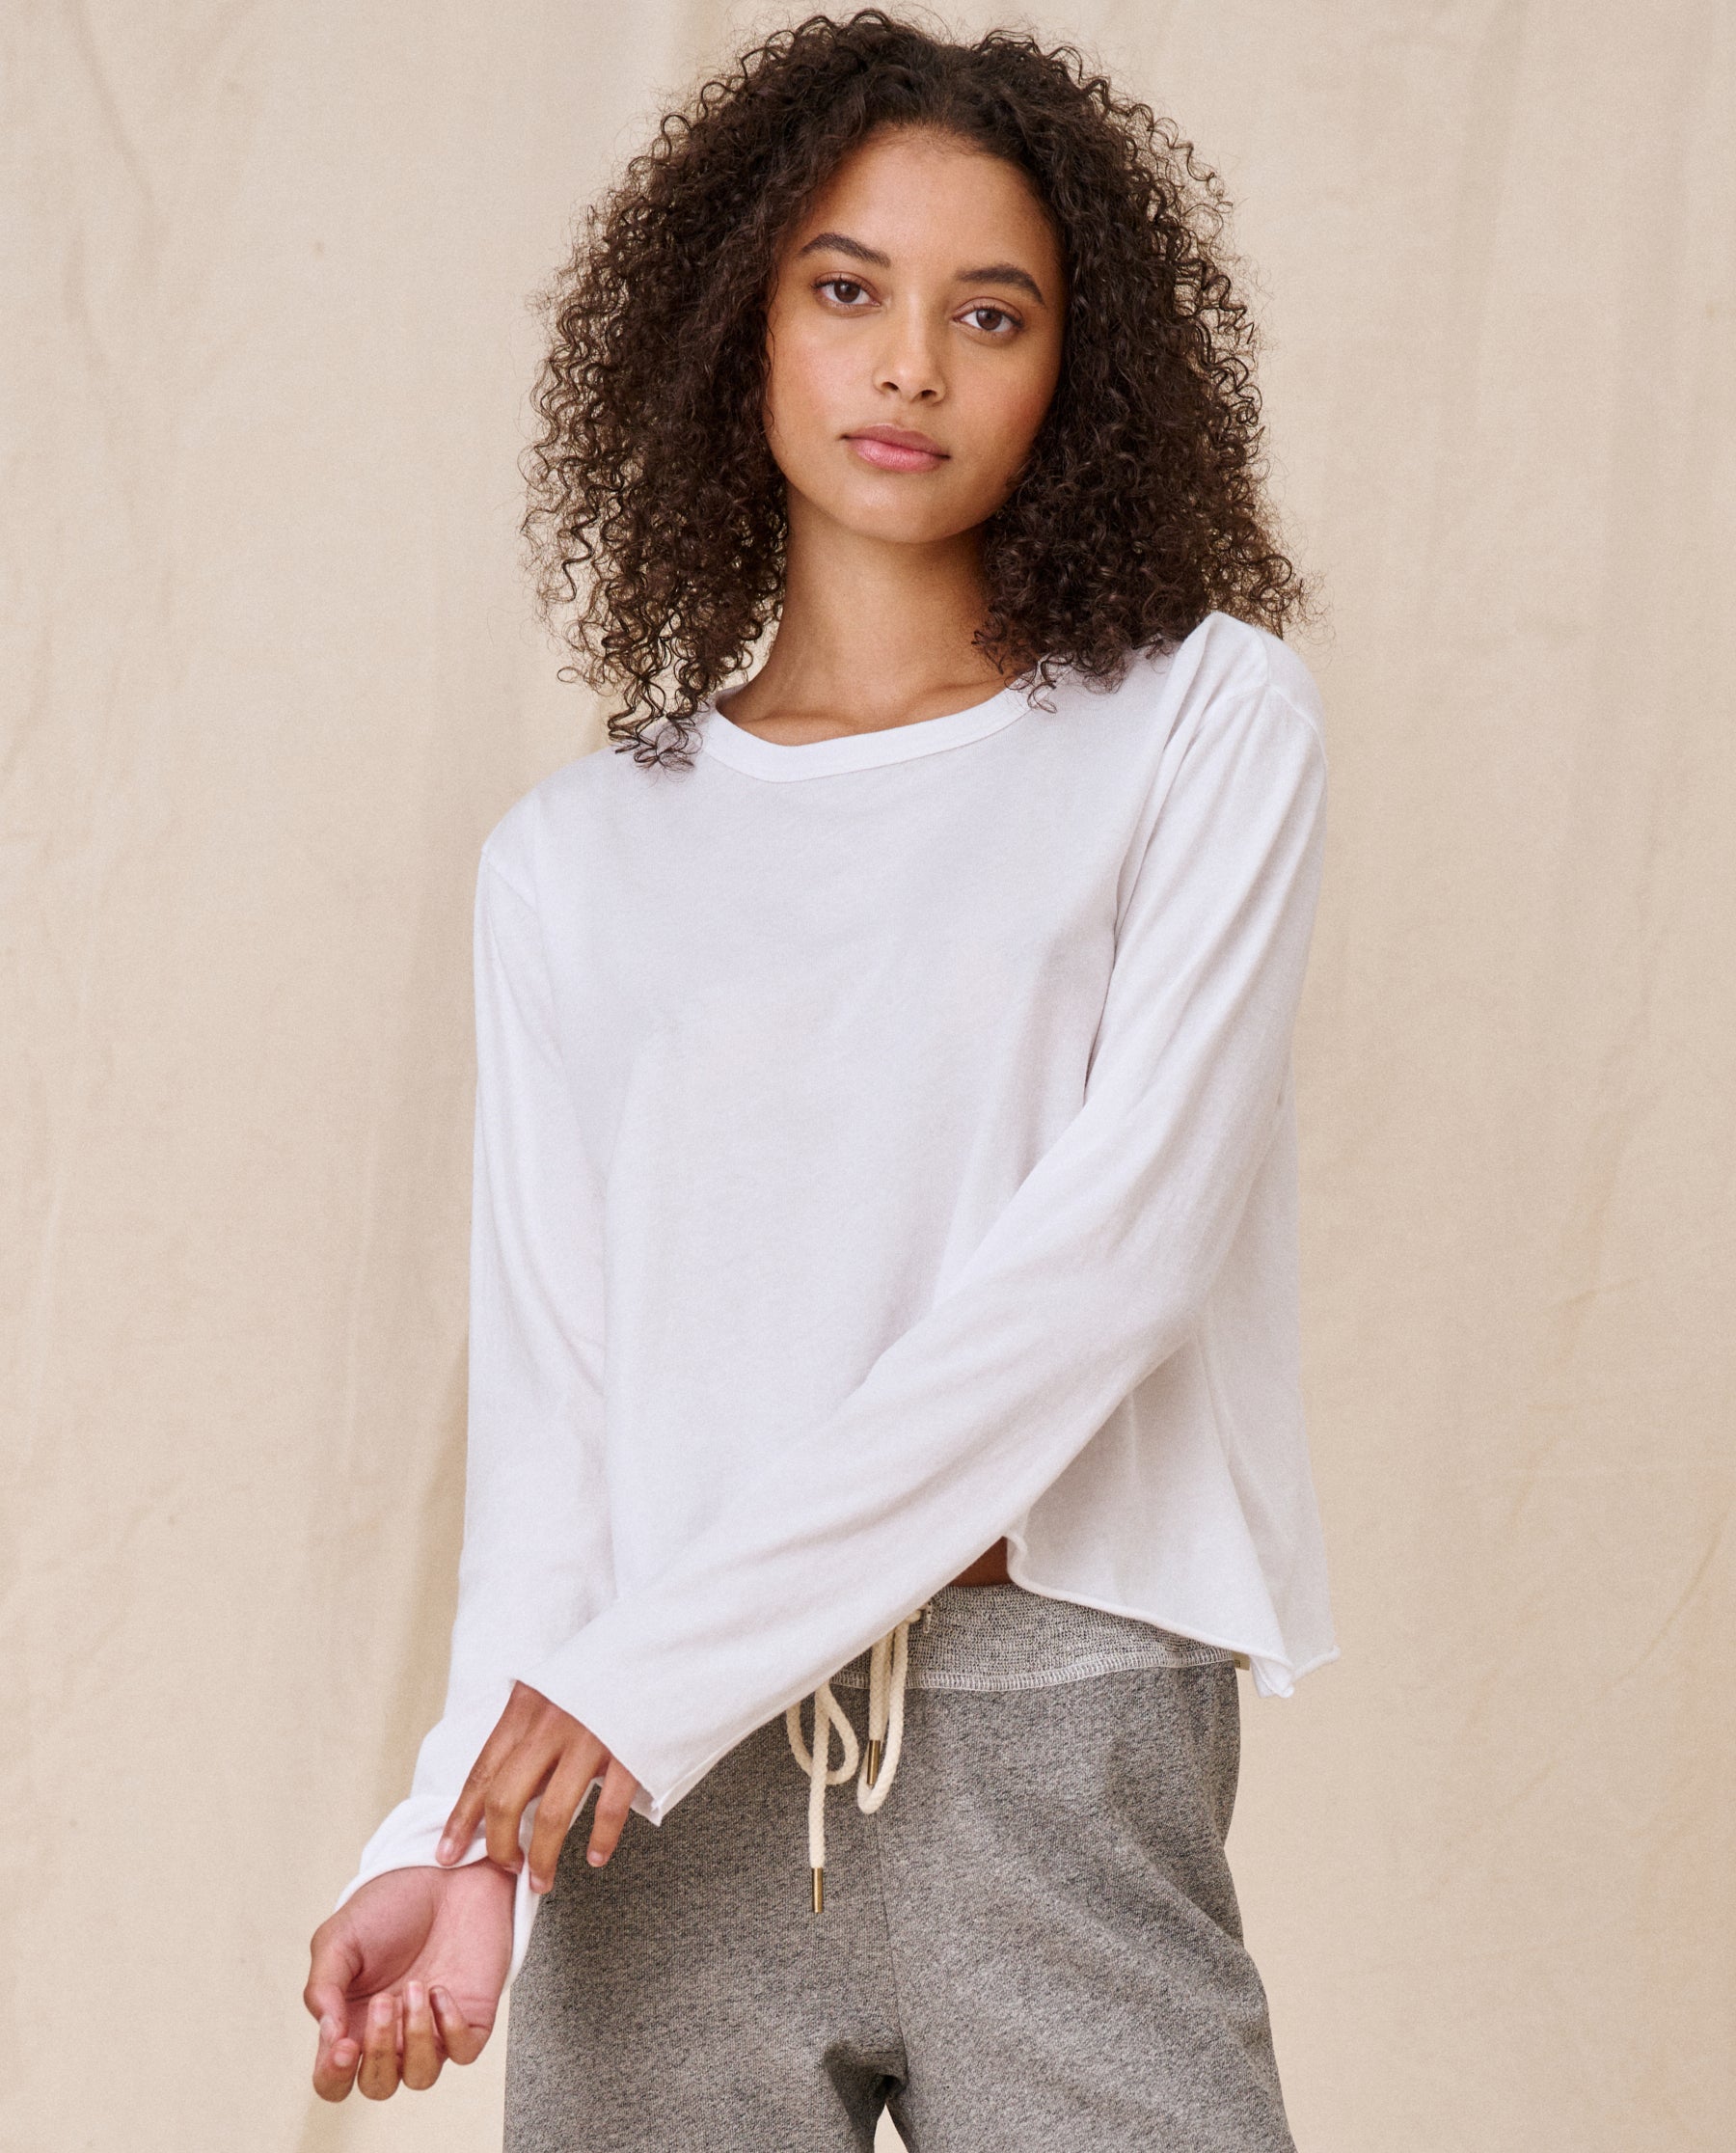 The Long Sleeve Crop Tee. -- TRUE WHITE TEES THE GREAT. CORE KNITS